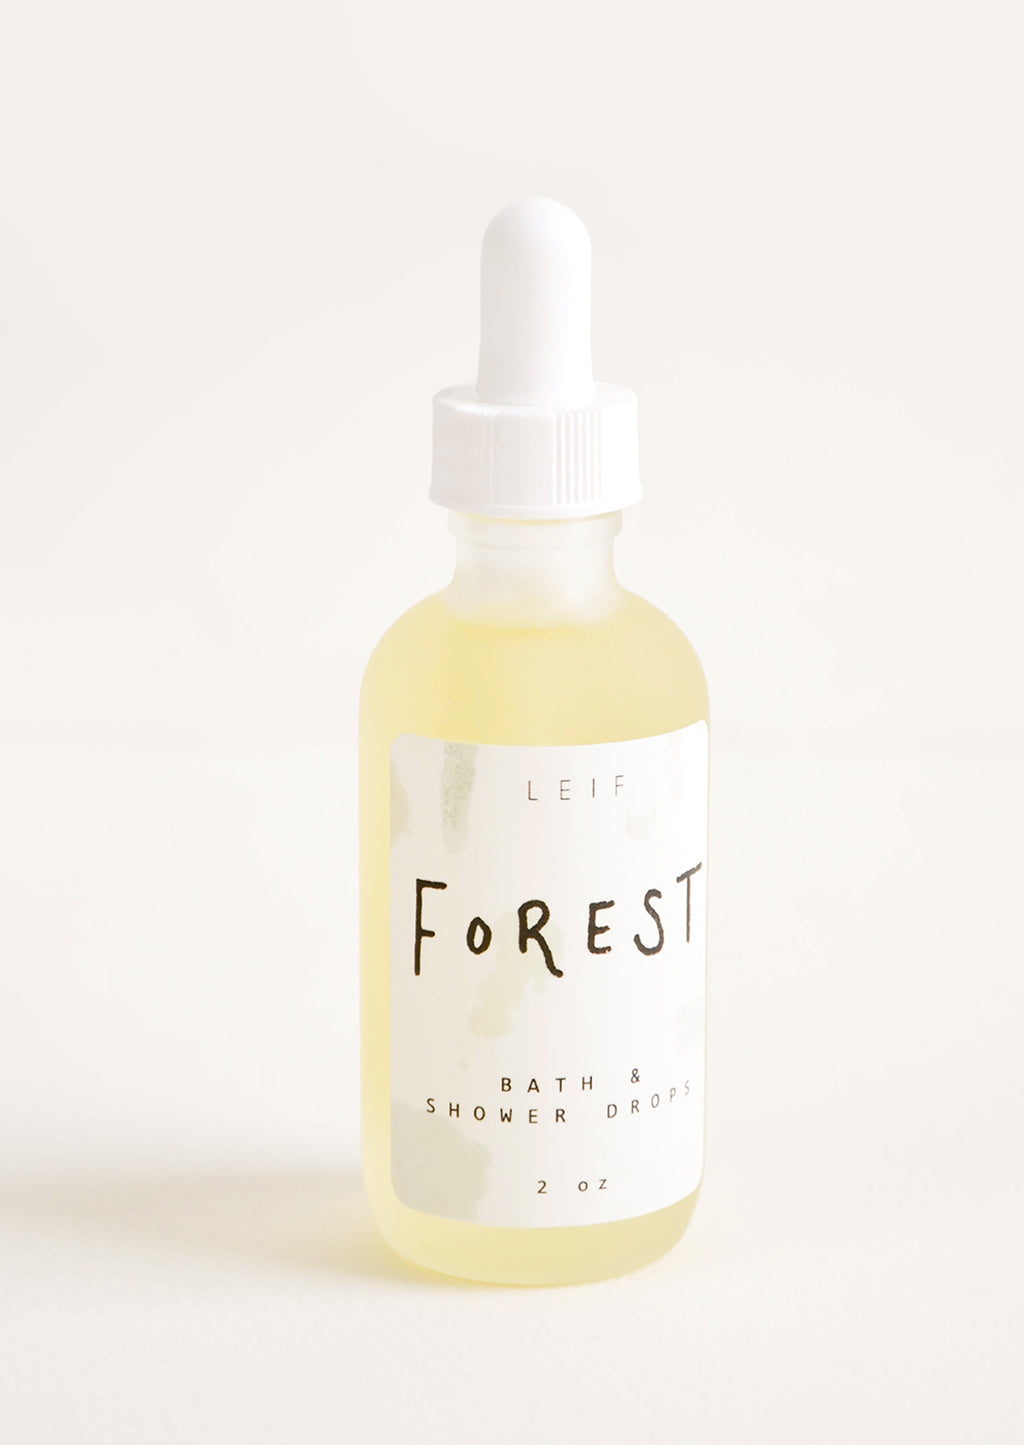 Forest: A small frosted glass dropper bottle with a white lid and a label reading "forest" filled with a pale yellow liquid.